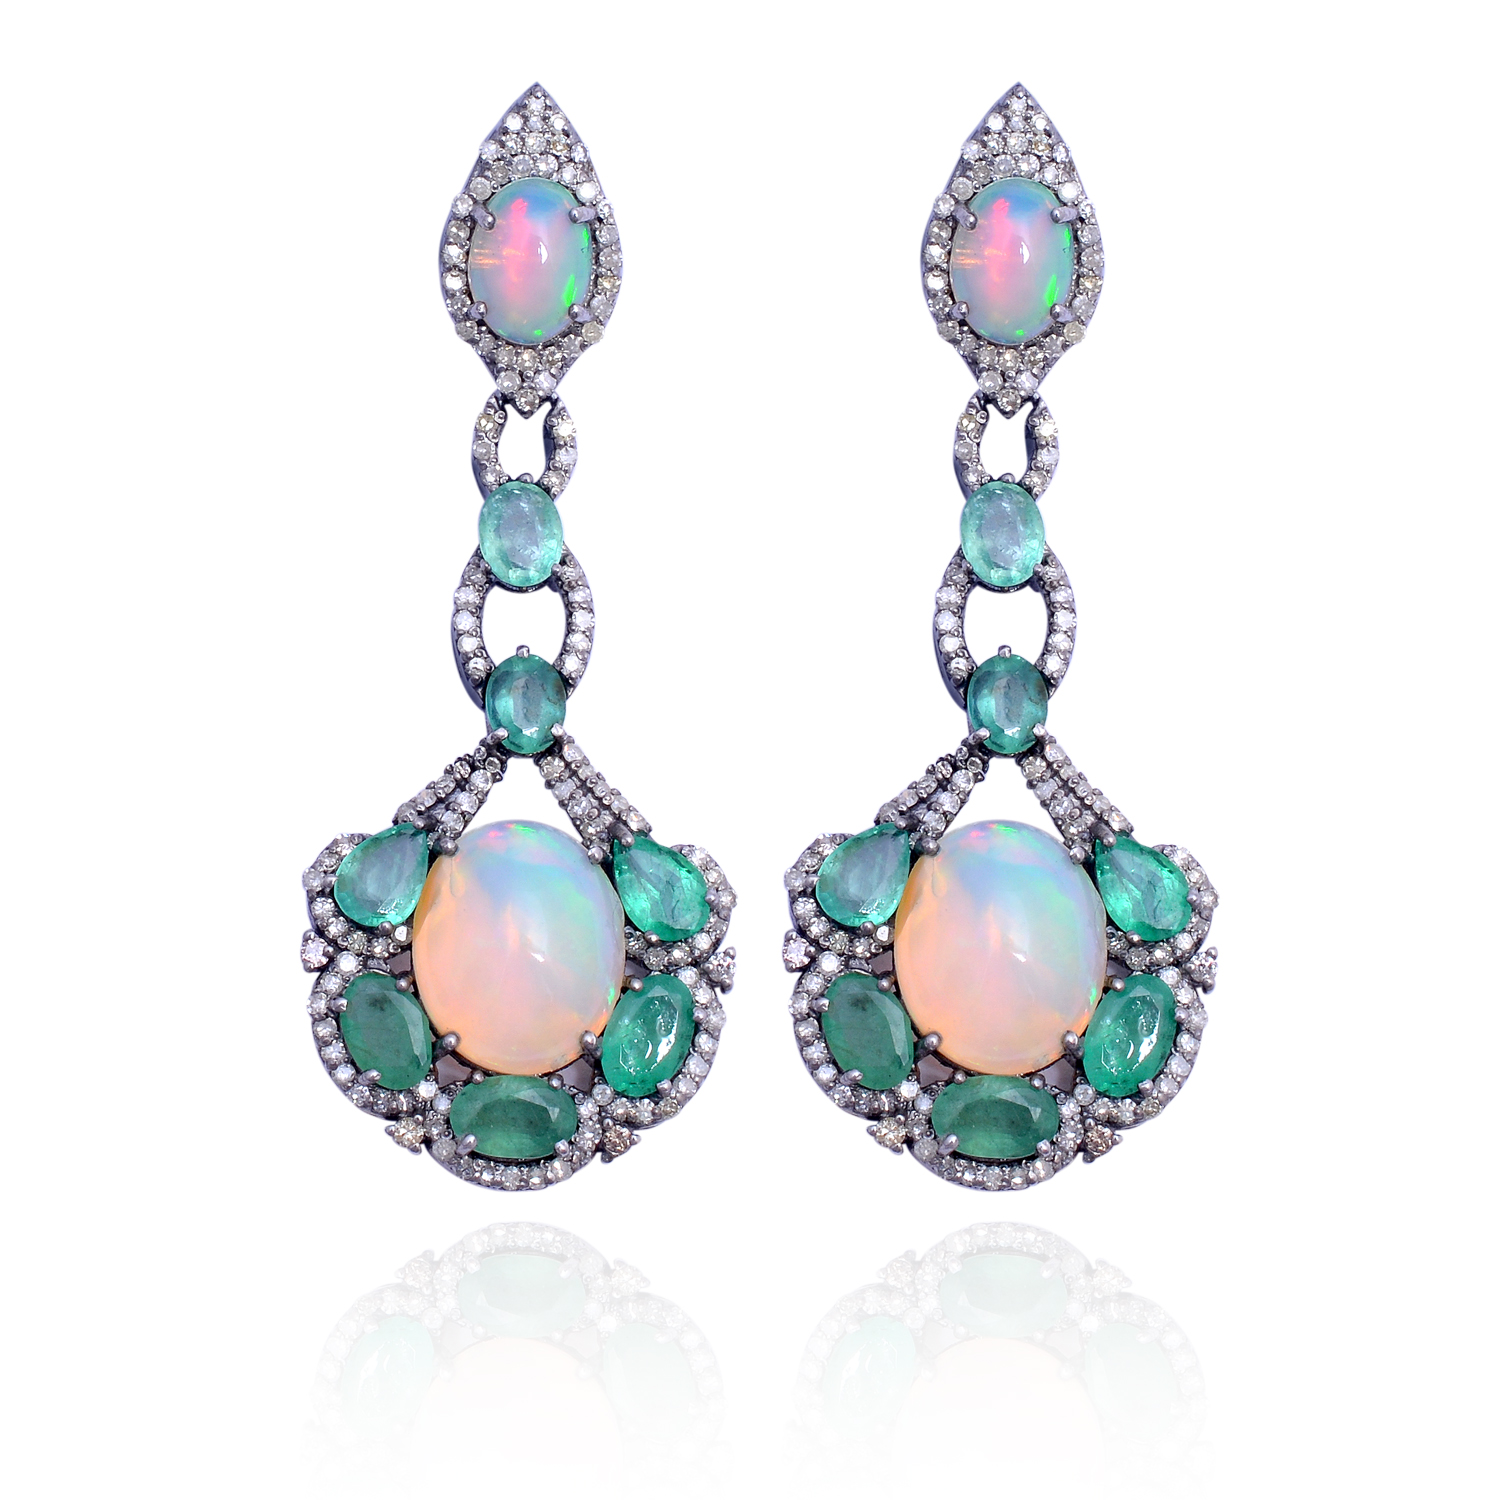 A PAIR OF EMERALD, OPAL AND DIAMOND